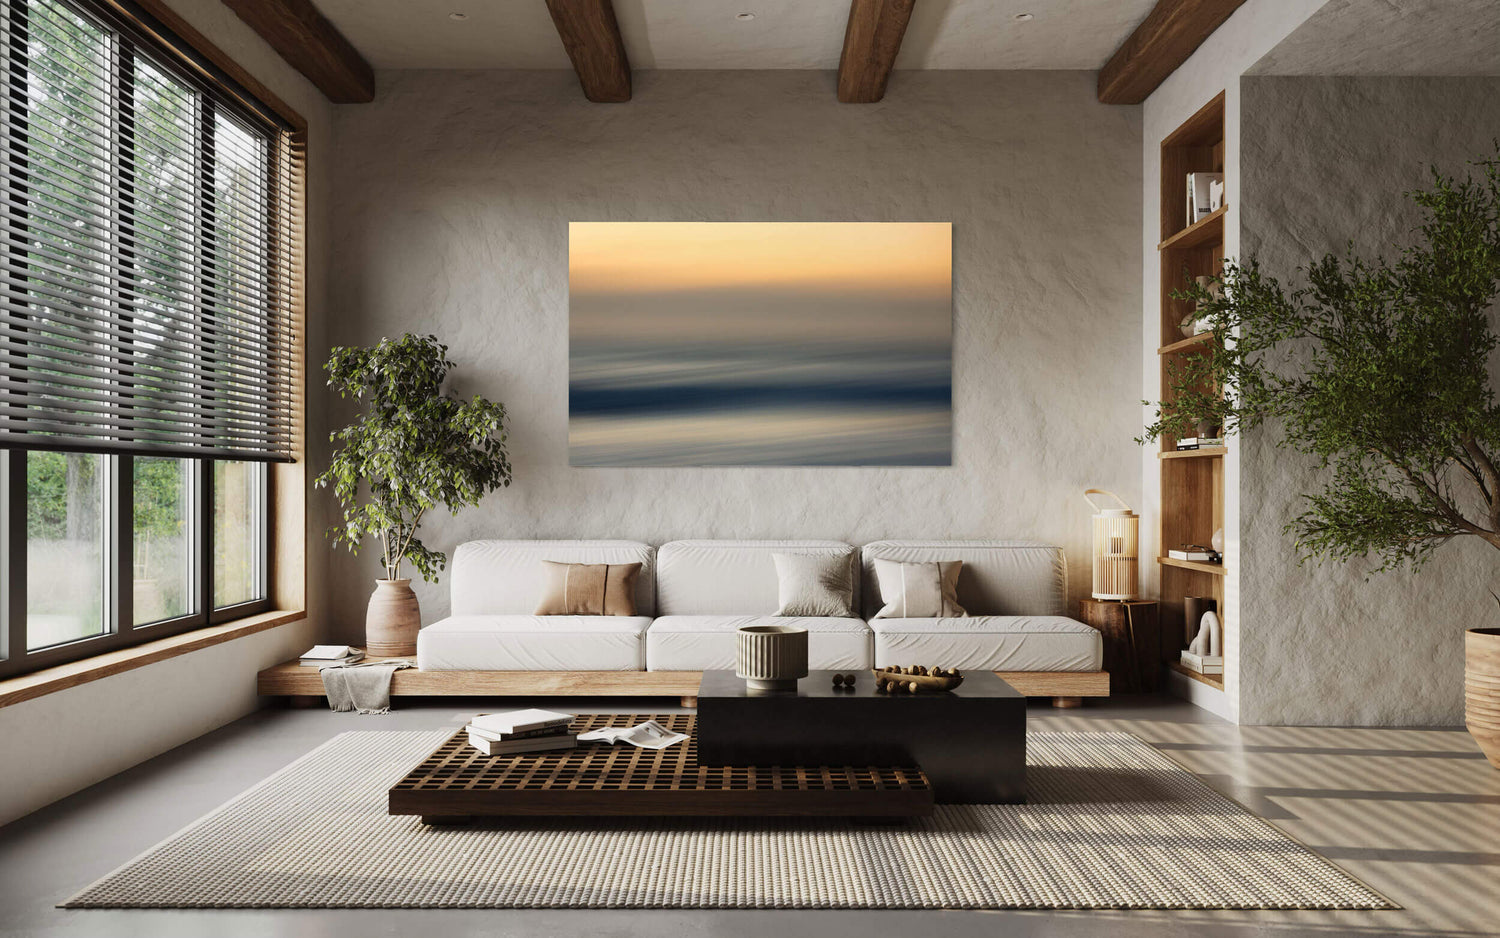 An abstract sunset picture photographed in Big Sur, California, hangs in a living room.